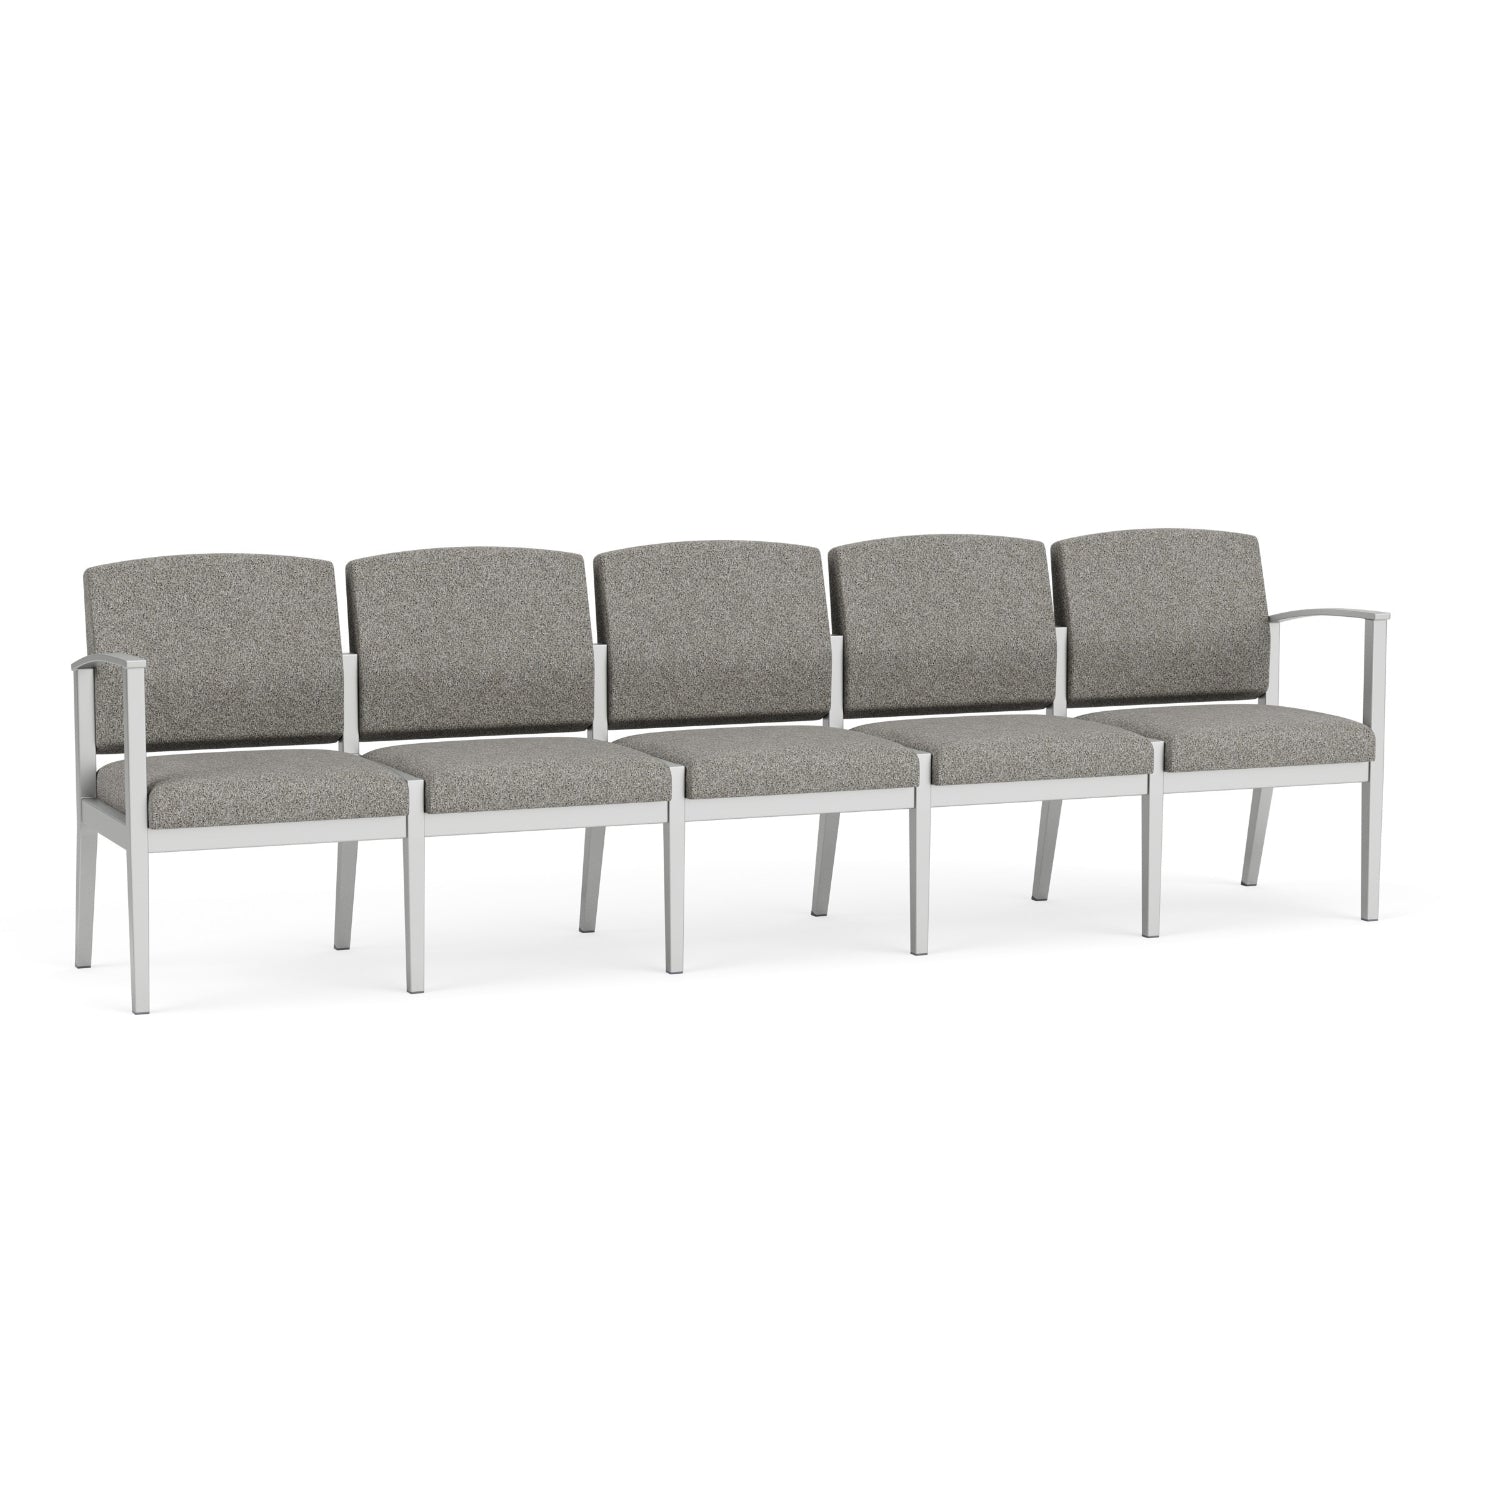 Amherst Steel Collection Reception Seating, 5-Seat Sofa, Standard Fabric Upholstery, FREE SHIPPING